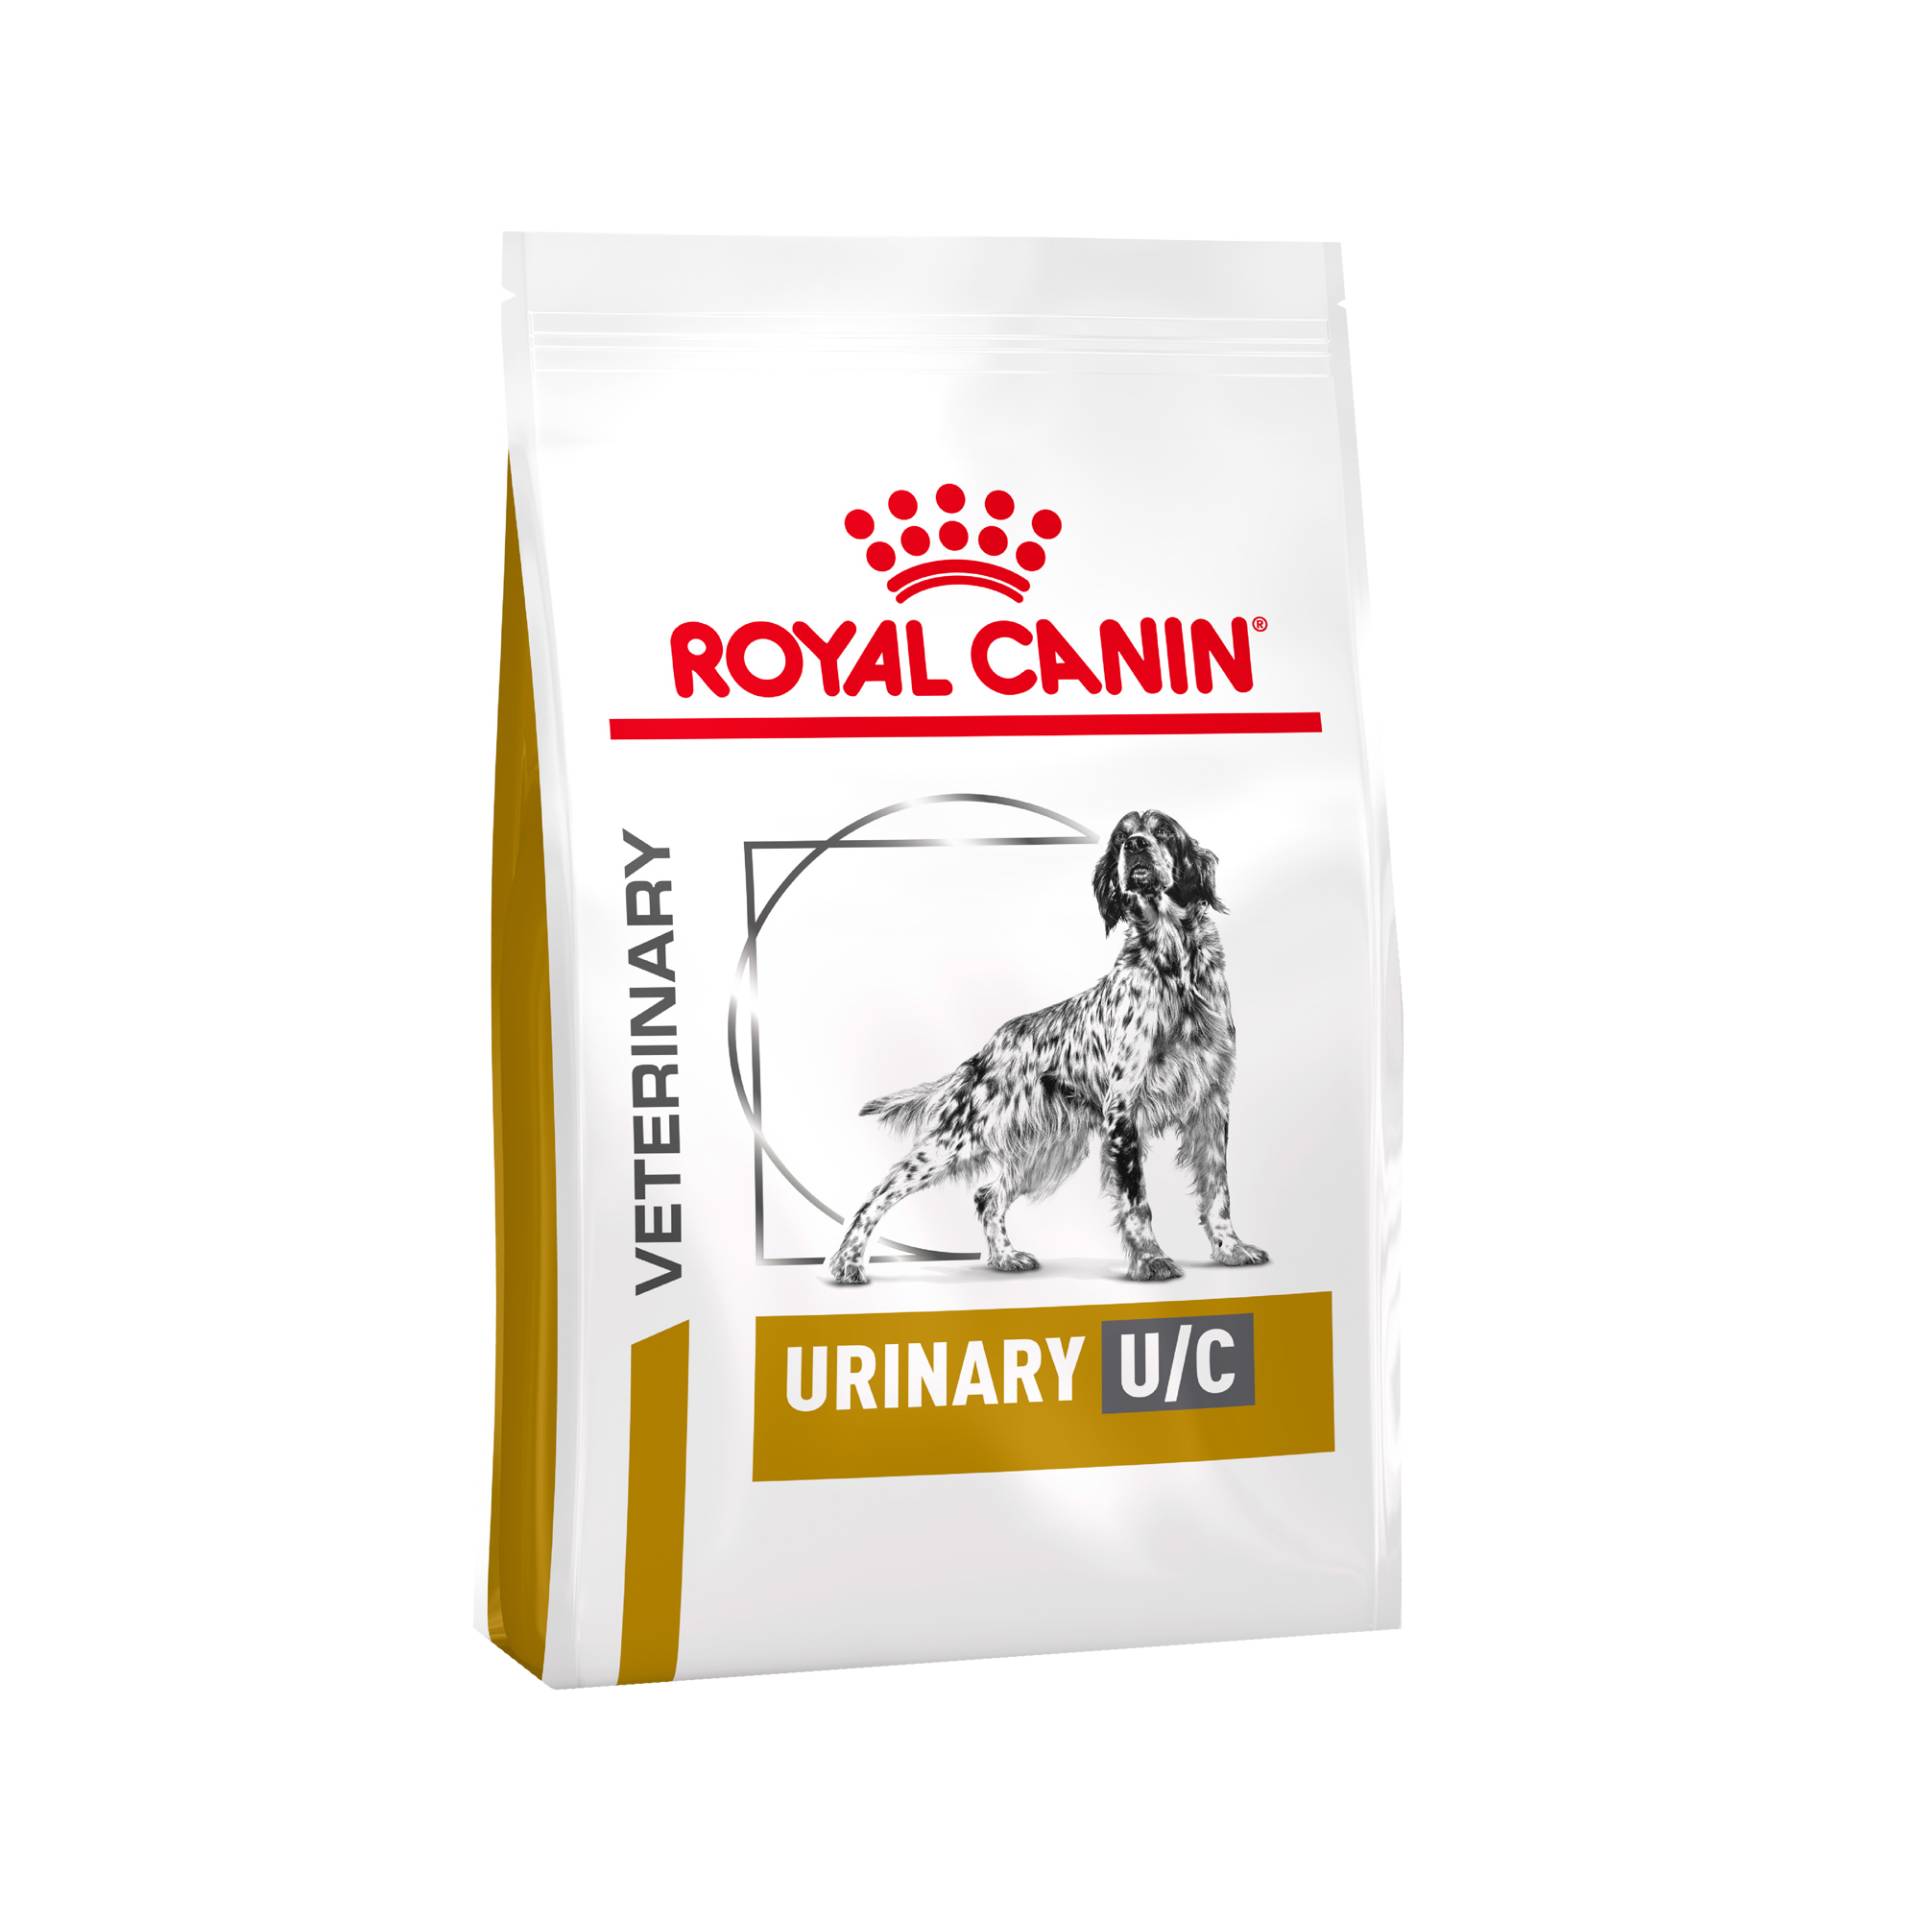 Royal Canin Urinary UC Low Purine (UUC 18) Hundefutter - 2 kg von Royal Canin